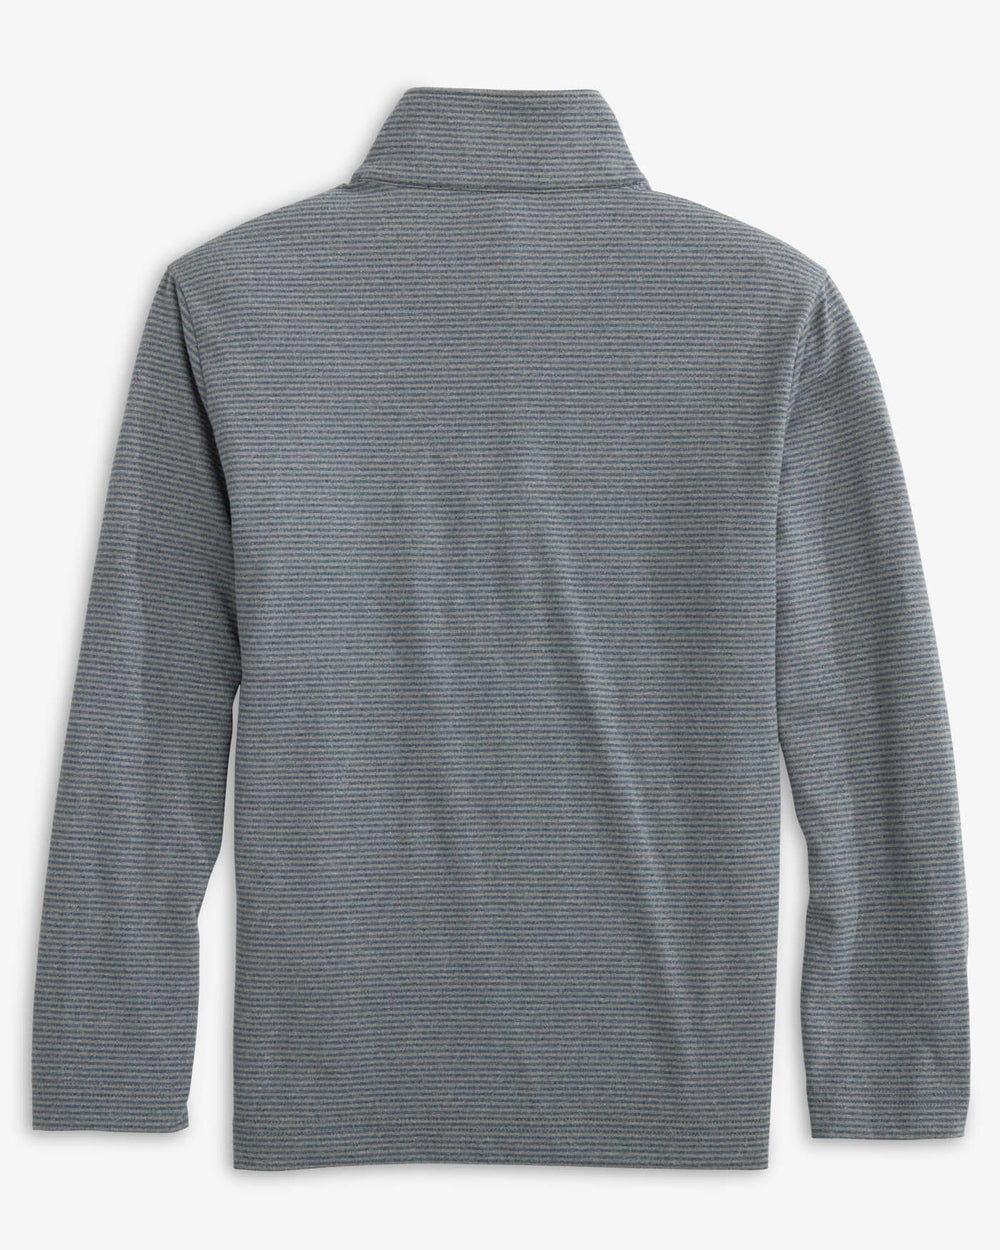 The back view of the Southern Tide Boys Cruiser Heather Micro-Stripe Quarter Zip Pullover by Southern Tide - Heather Shadow Grey